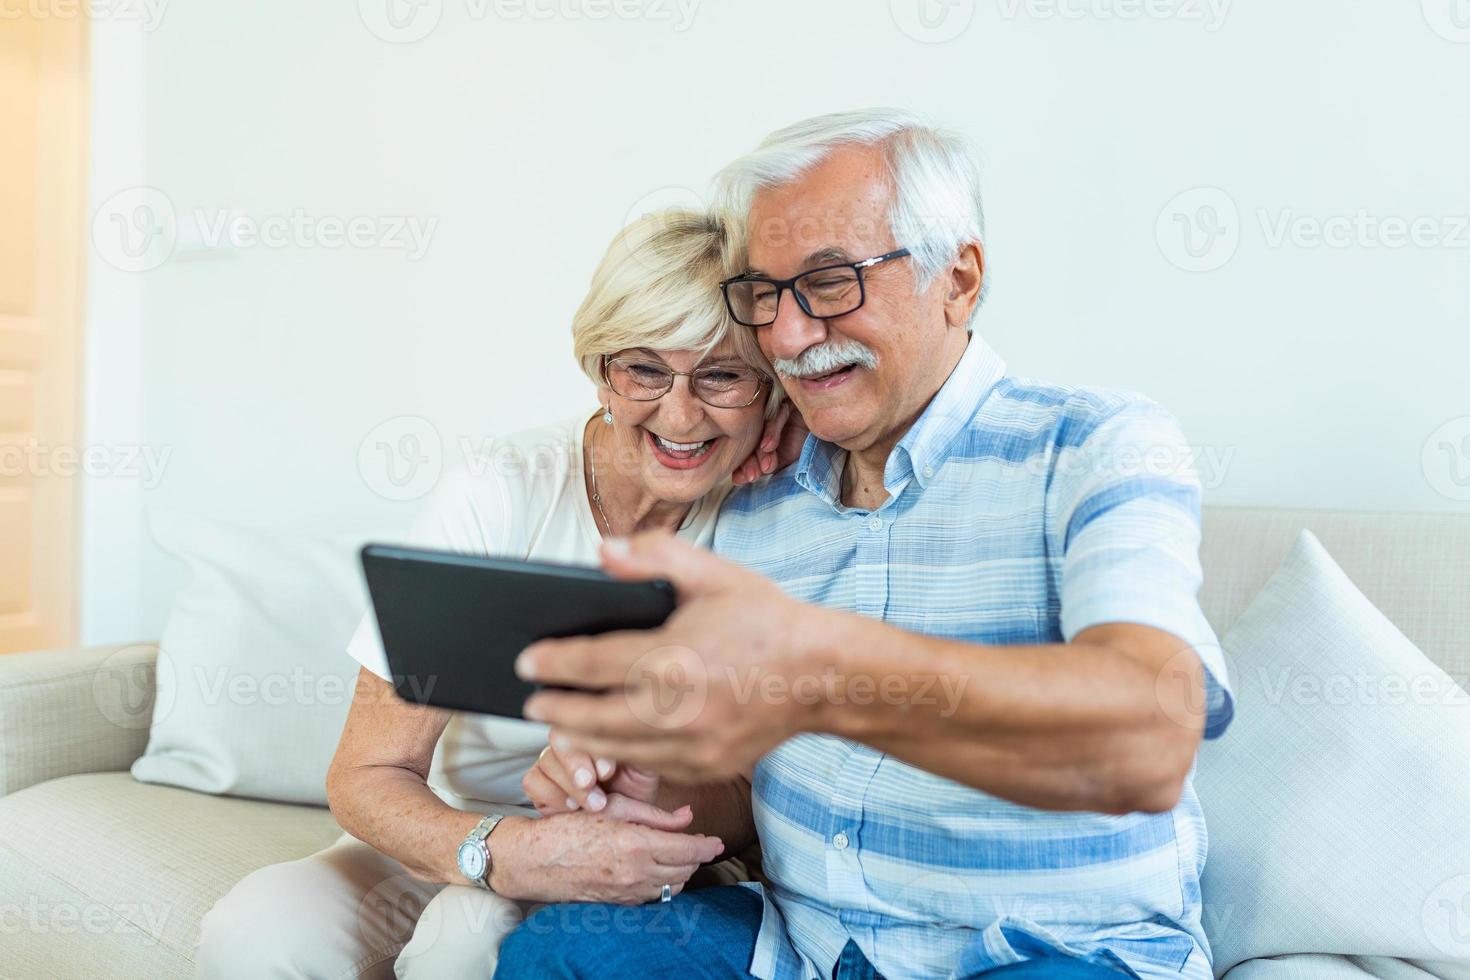 Cheerful senior people websurfing on internet with tablet,family, technology, age and people concept - happy senior couple with tablet pc computer at home photo